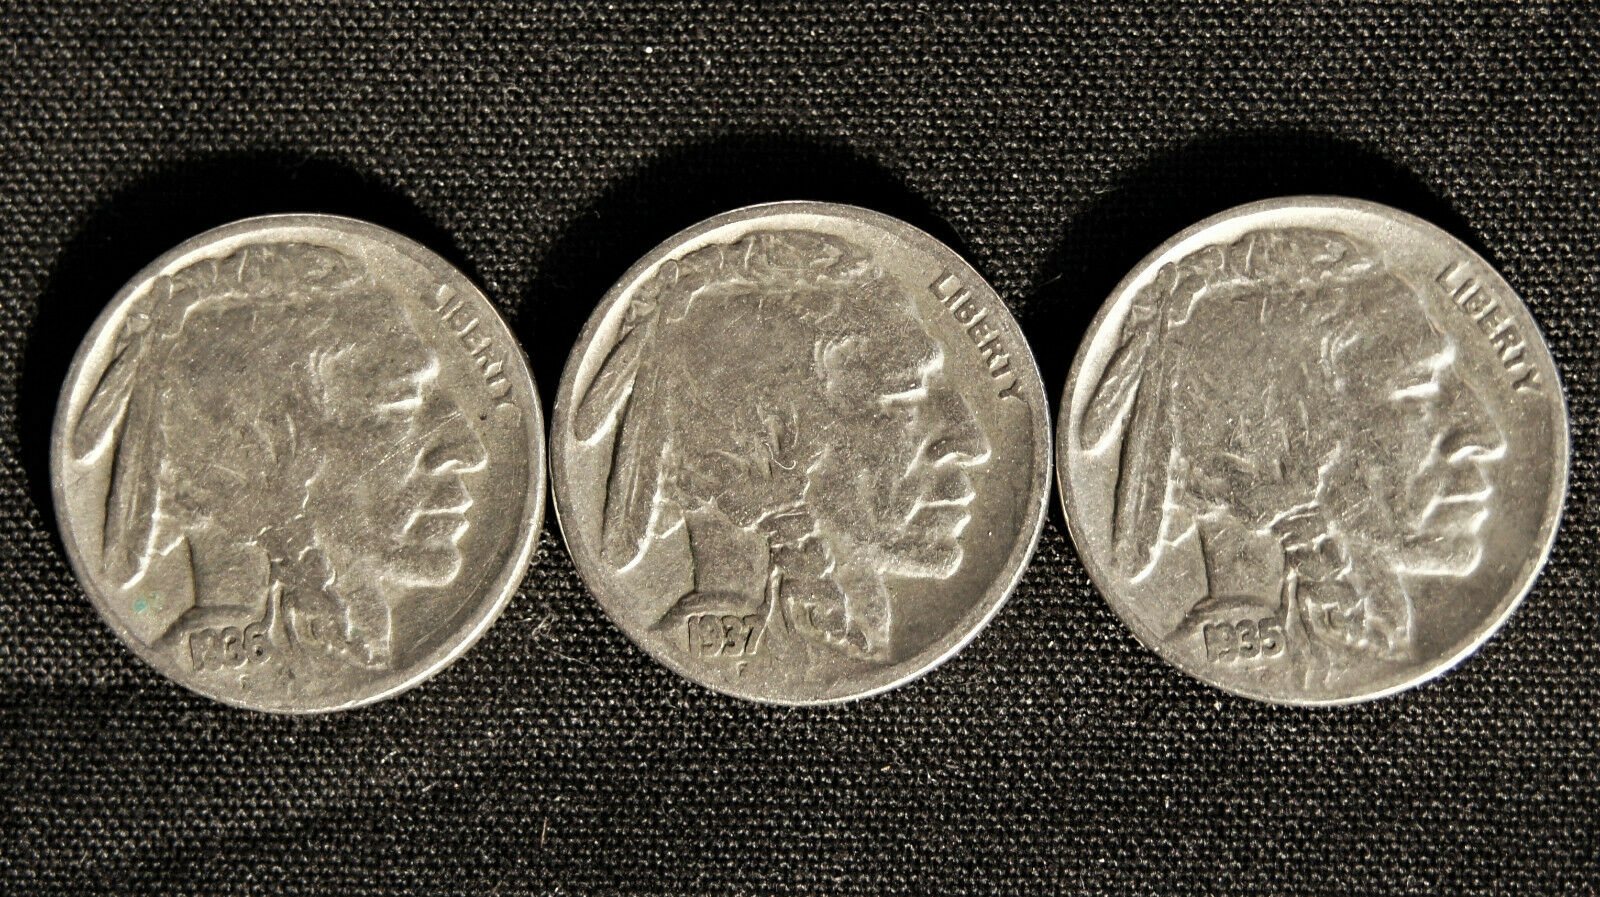 Buffalo Indian Head Nickel Lot (3) Coins With Full Dates - All Different Dates!